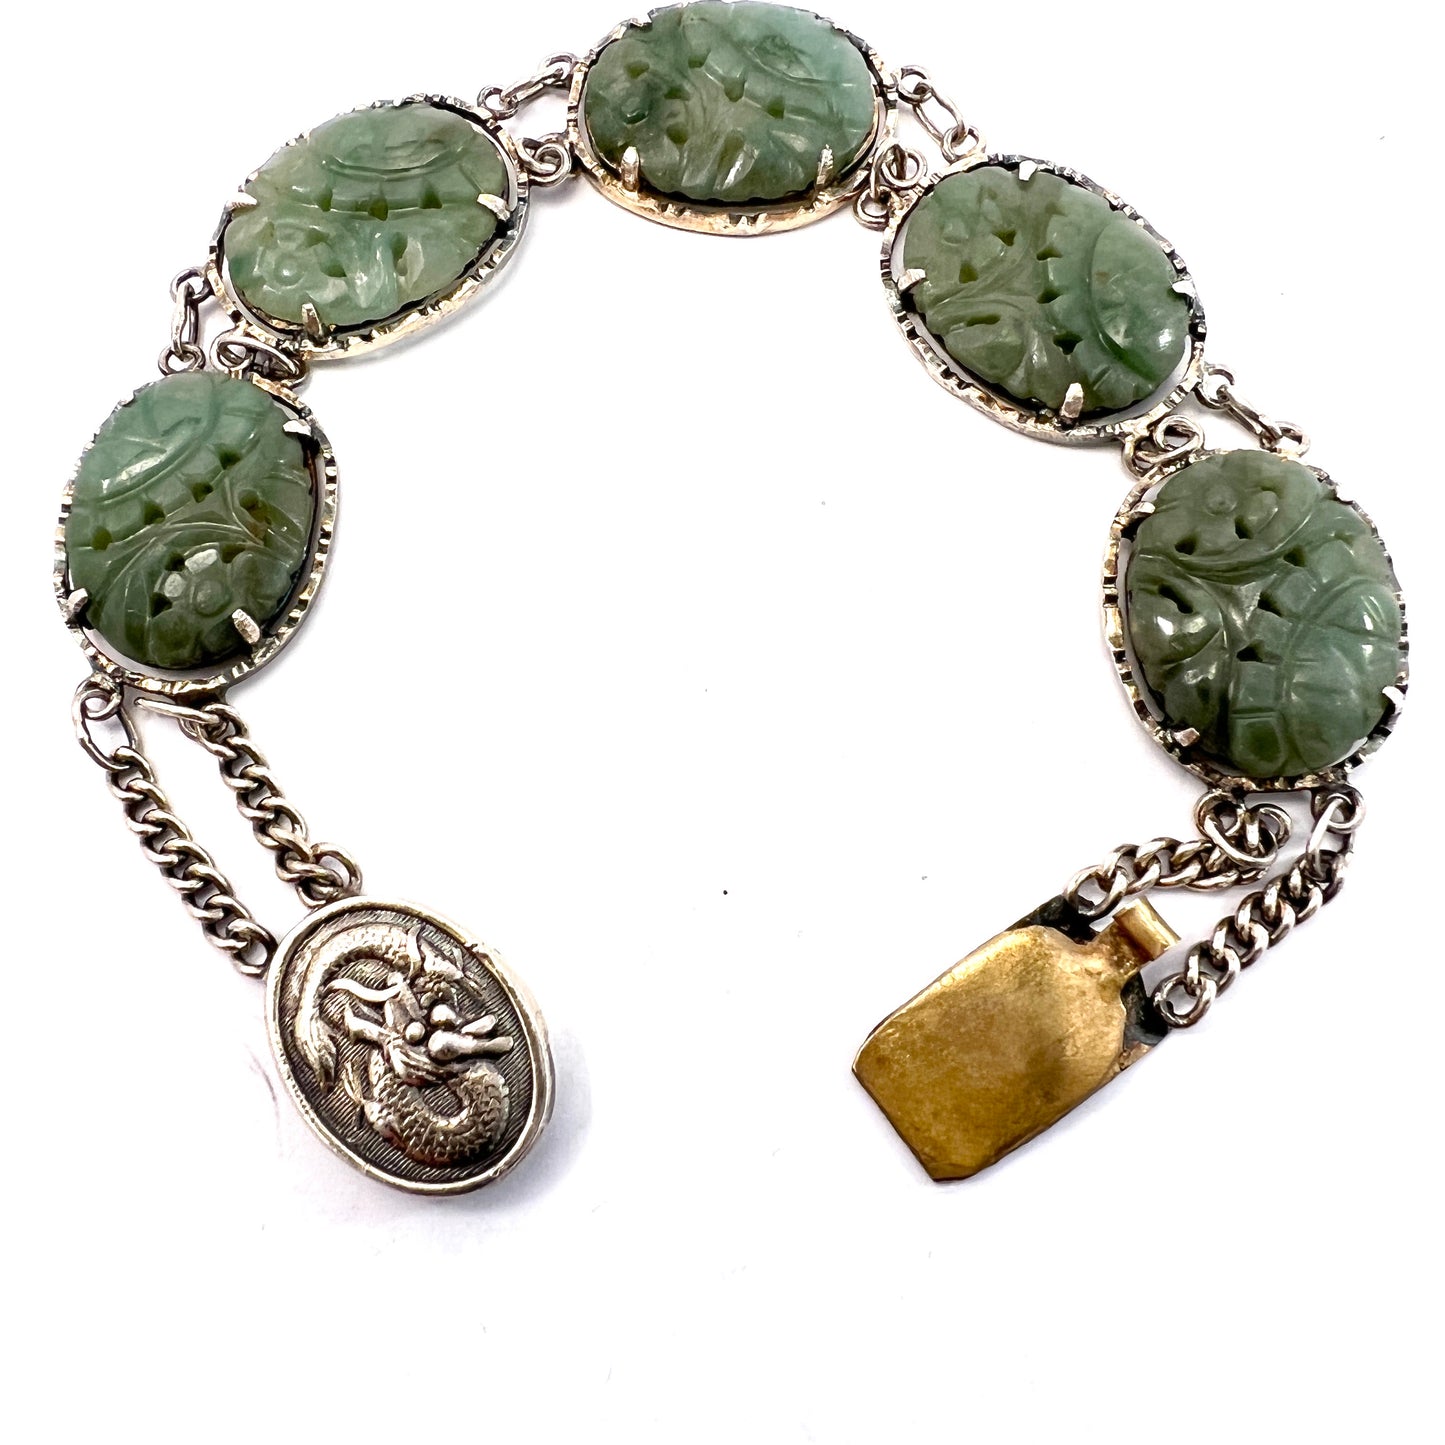 Chinese Export c 1930. Solid Silver Carved Jade Bracelet. Hallmarked China.